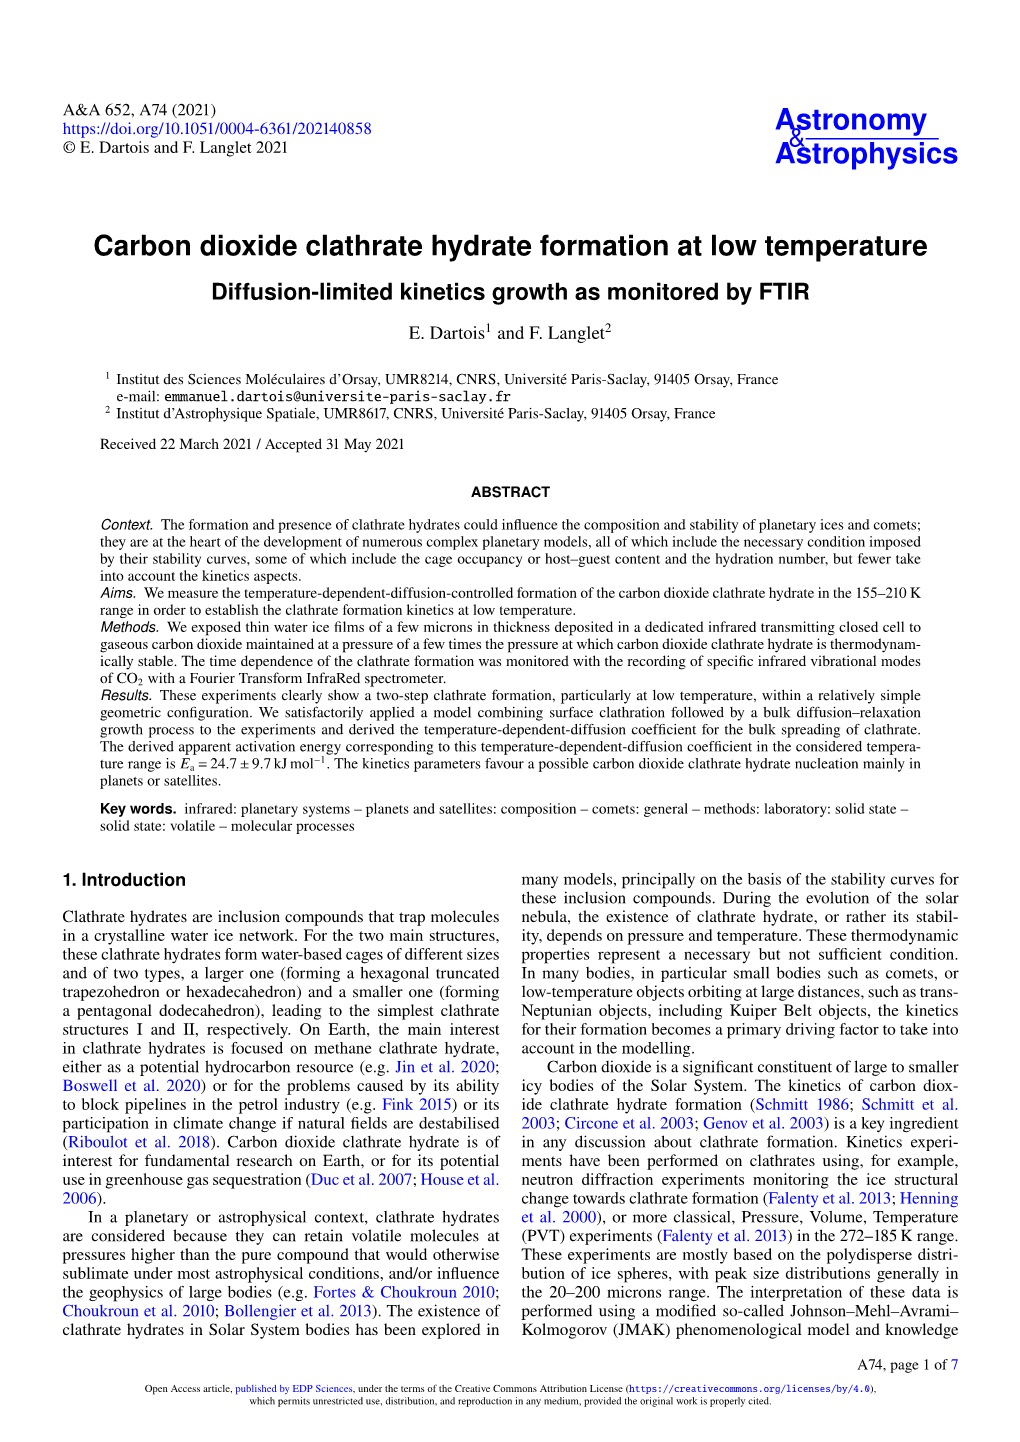 Carbon Dioxide Clathrate Hydrate Formation at Low Temperature Diffusion-Limited Kinetics Growth As Monitored by FTIR E